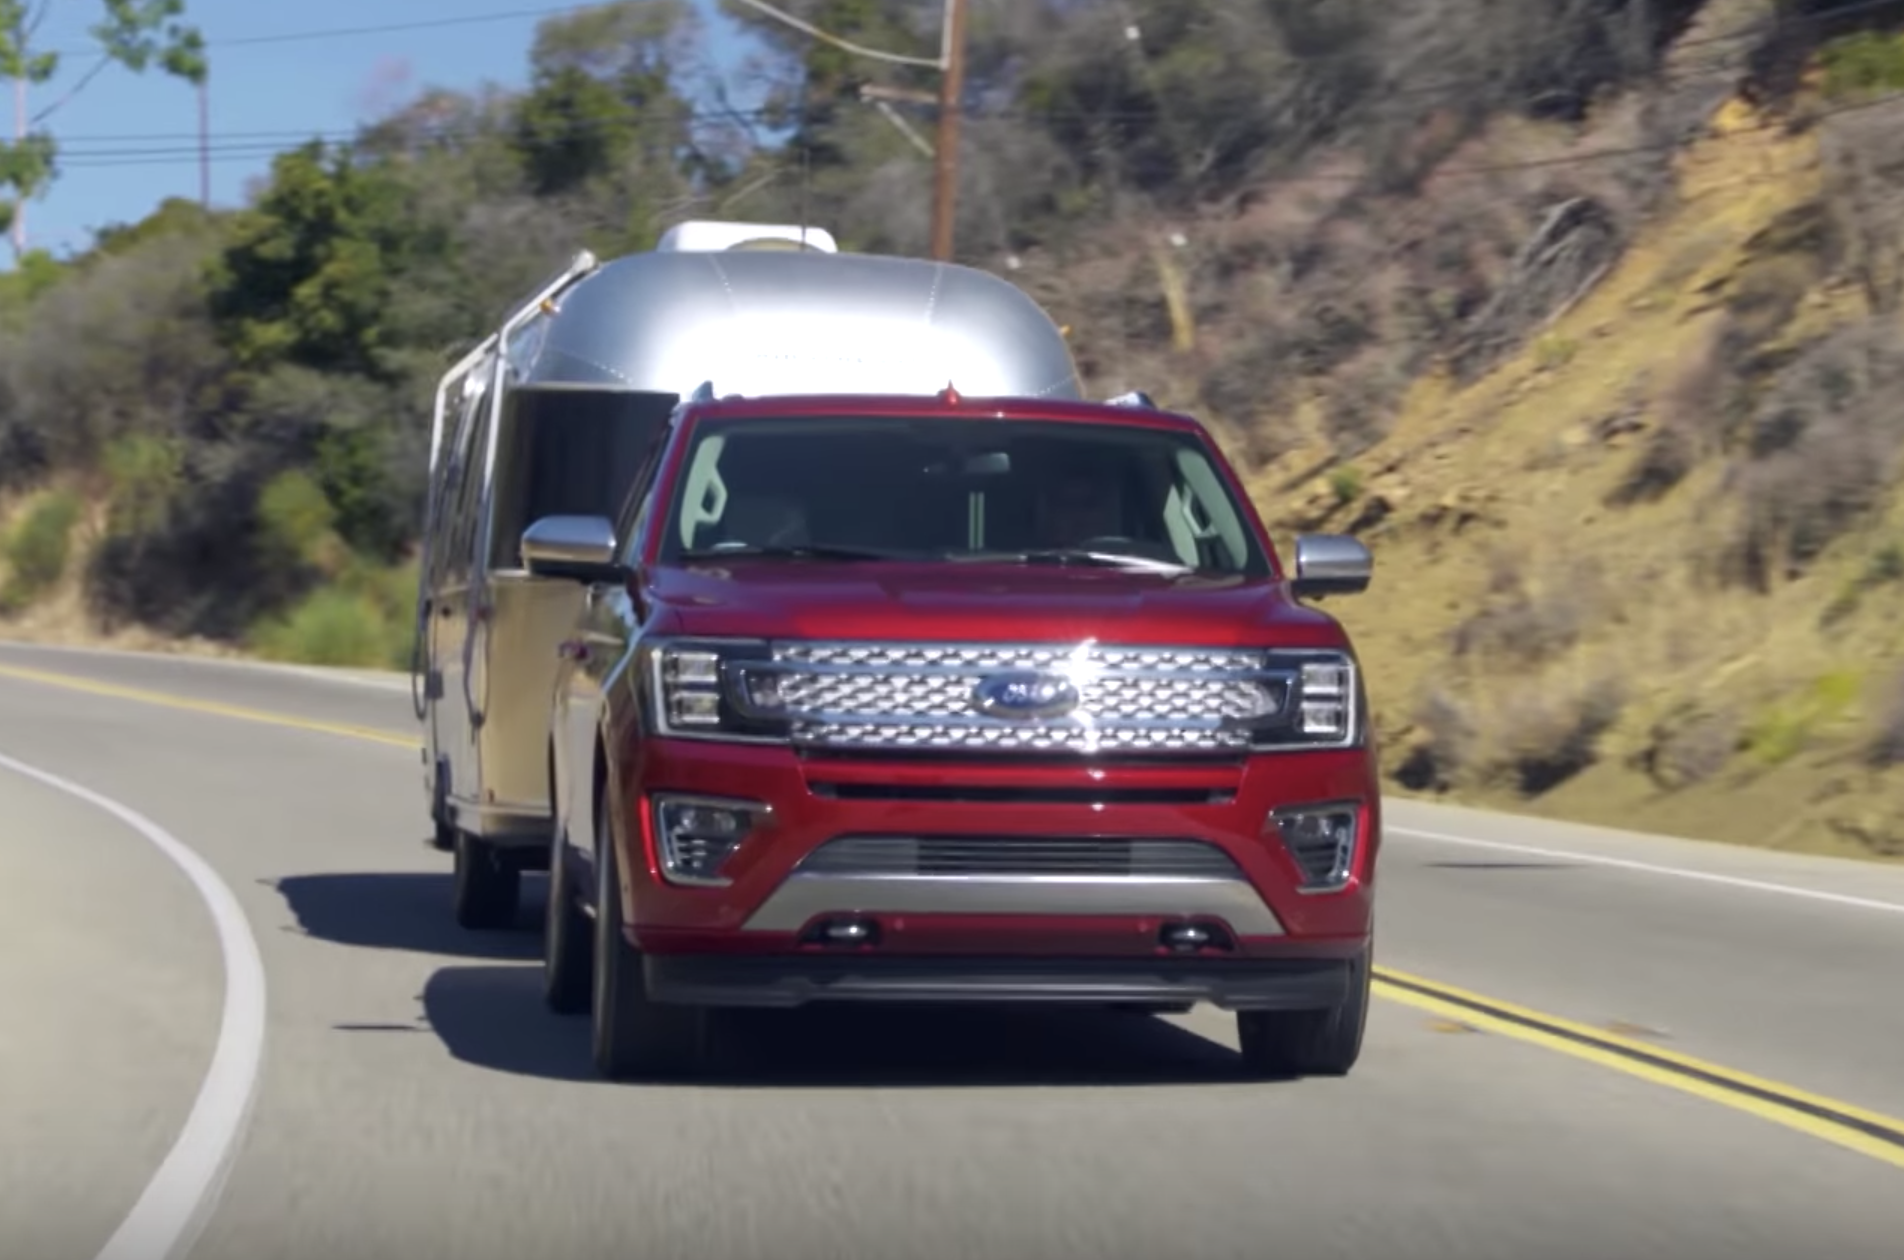 Ford Expedition towing capacity